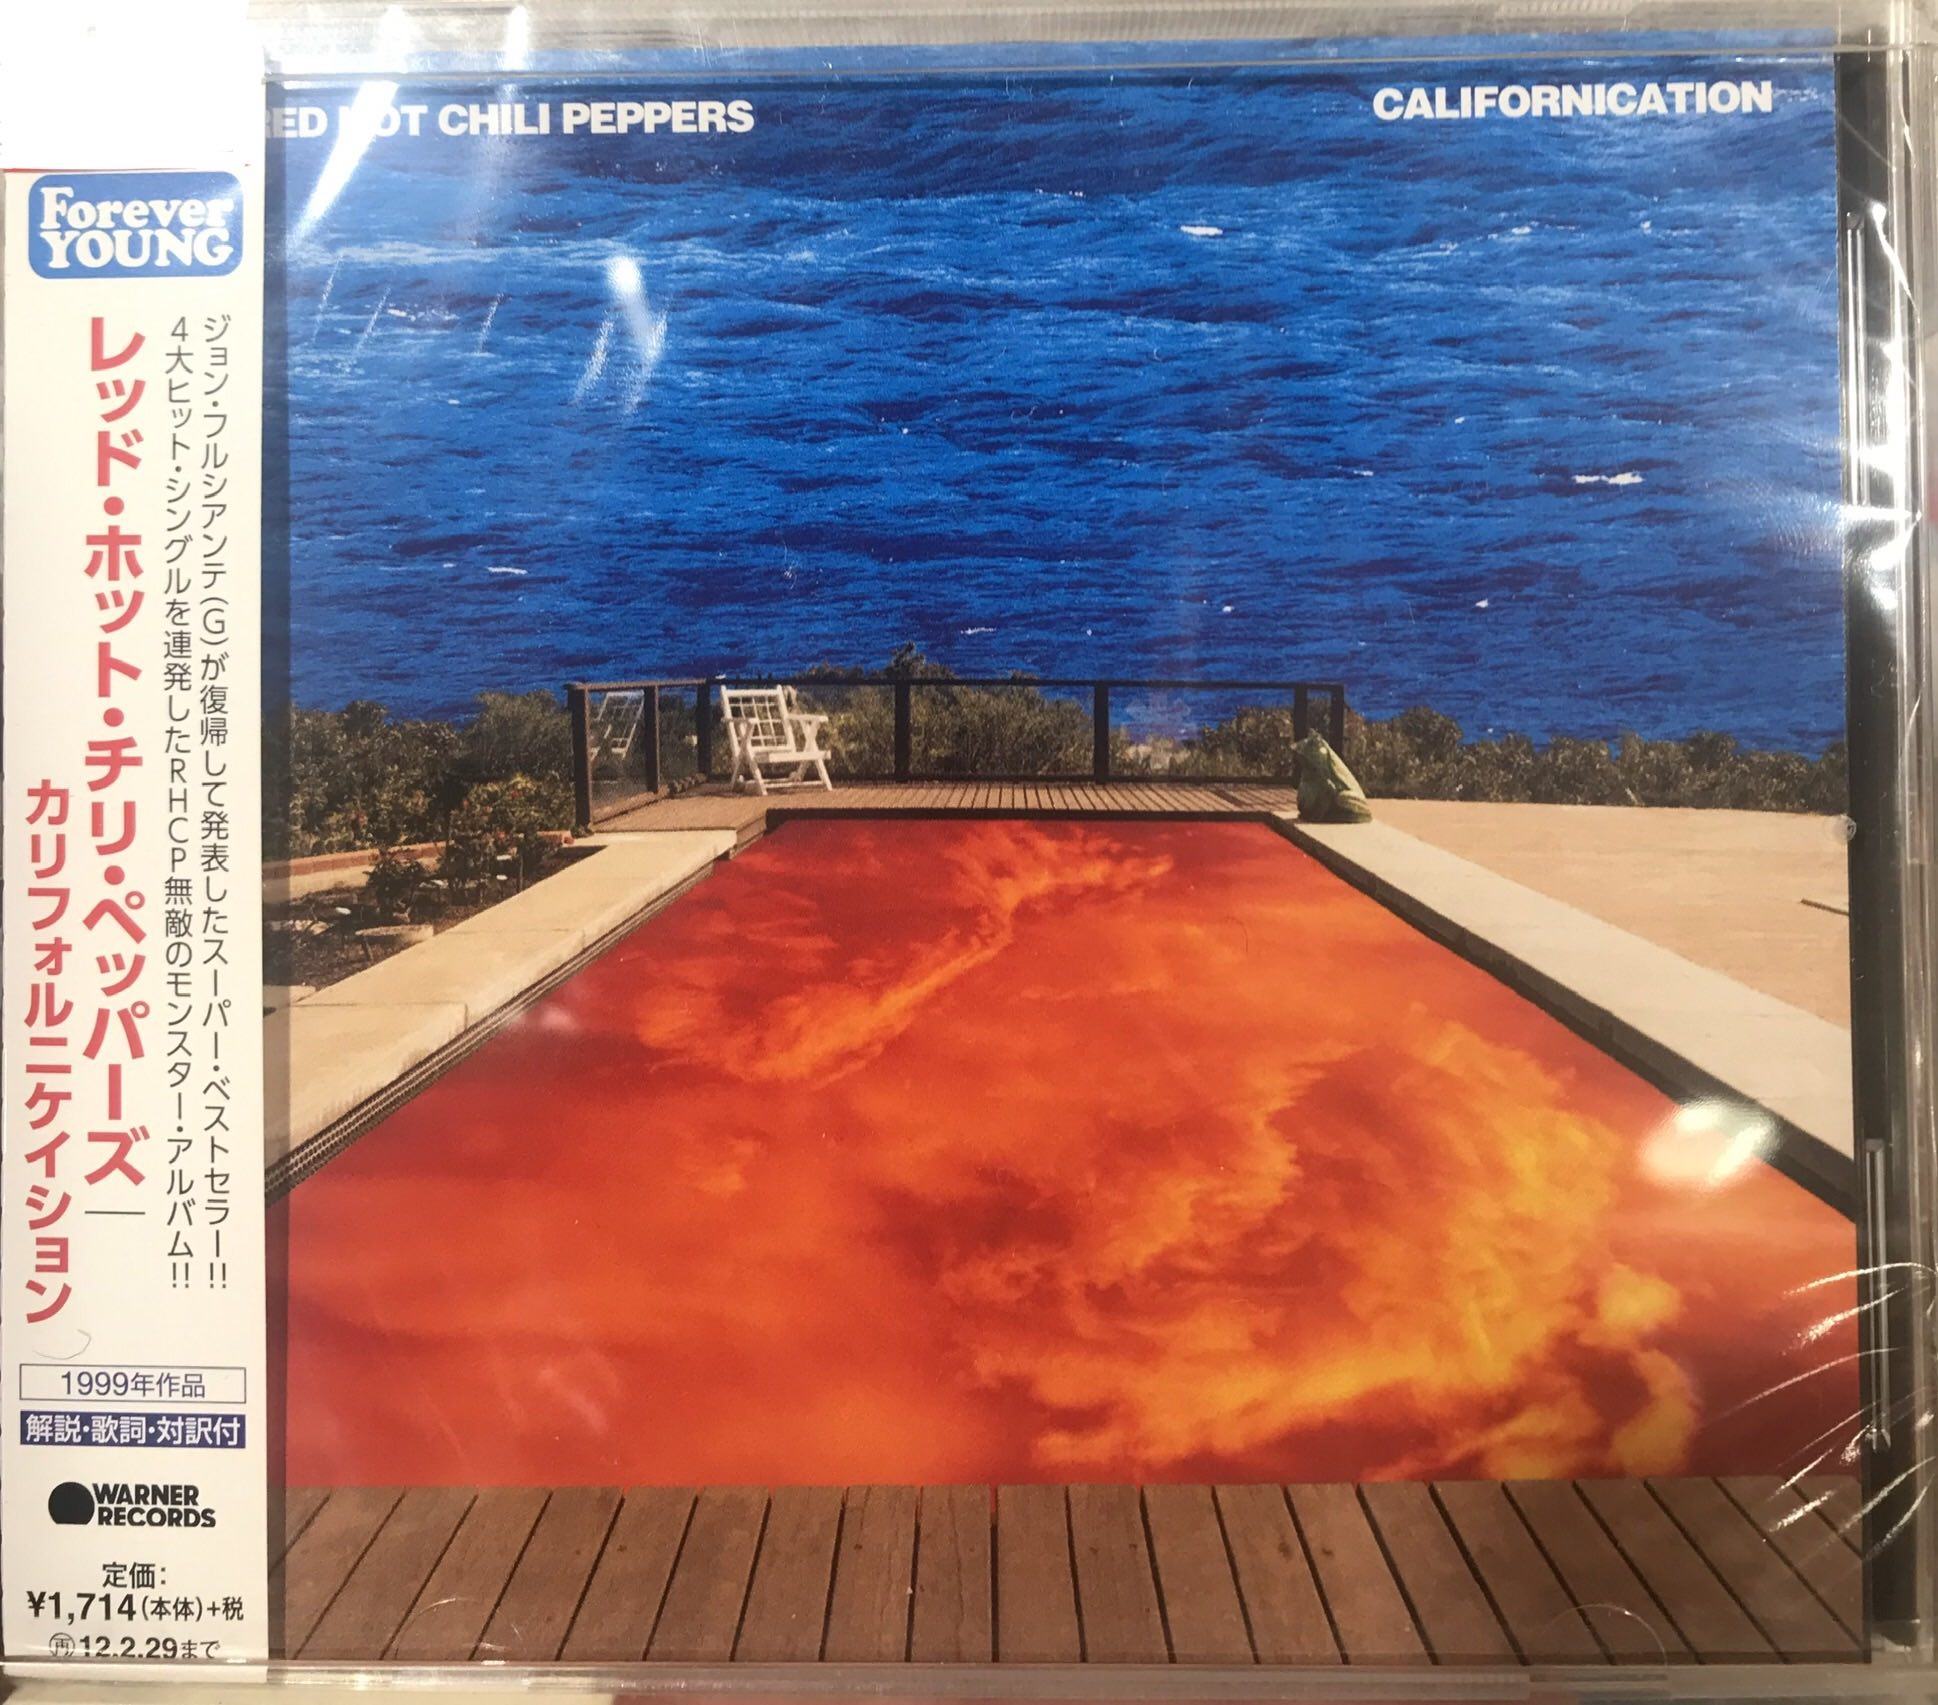 Red Hot Chili Peppers ‎– Californication